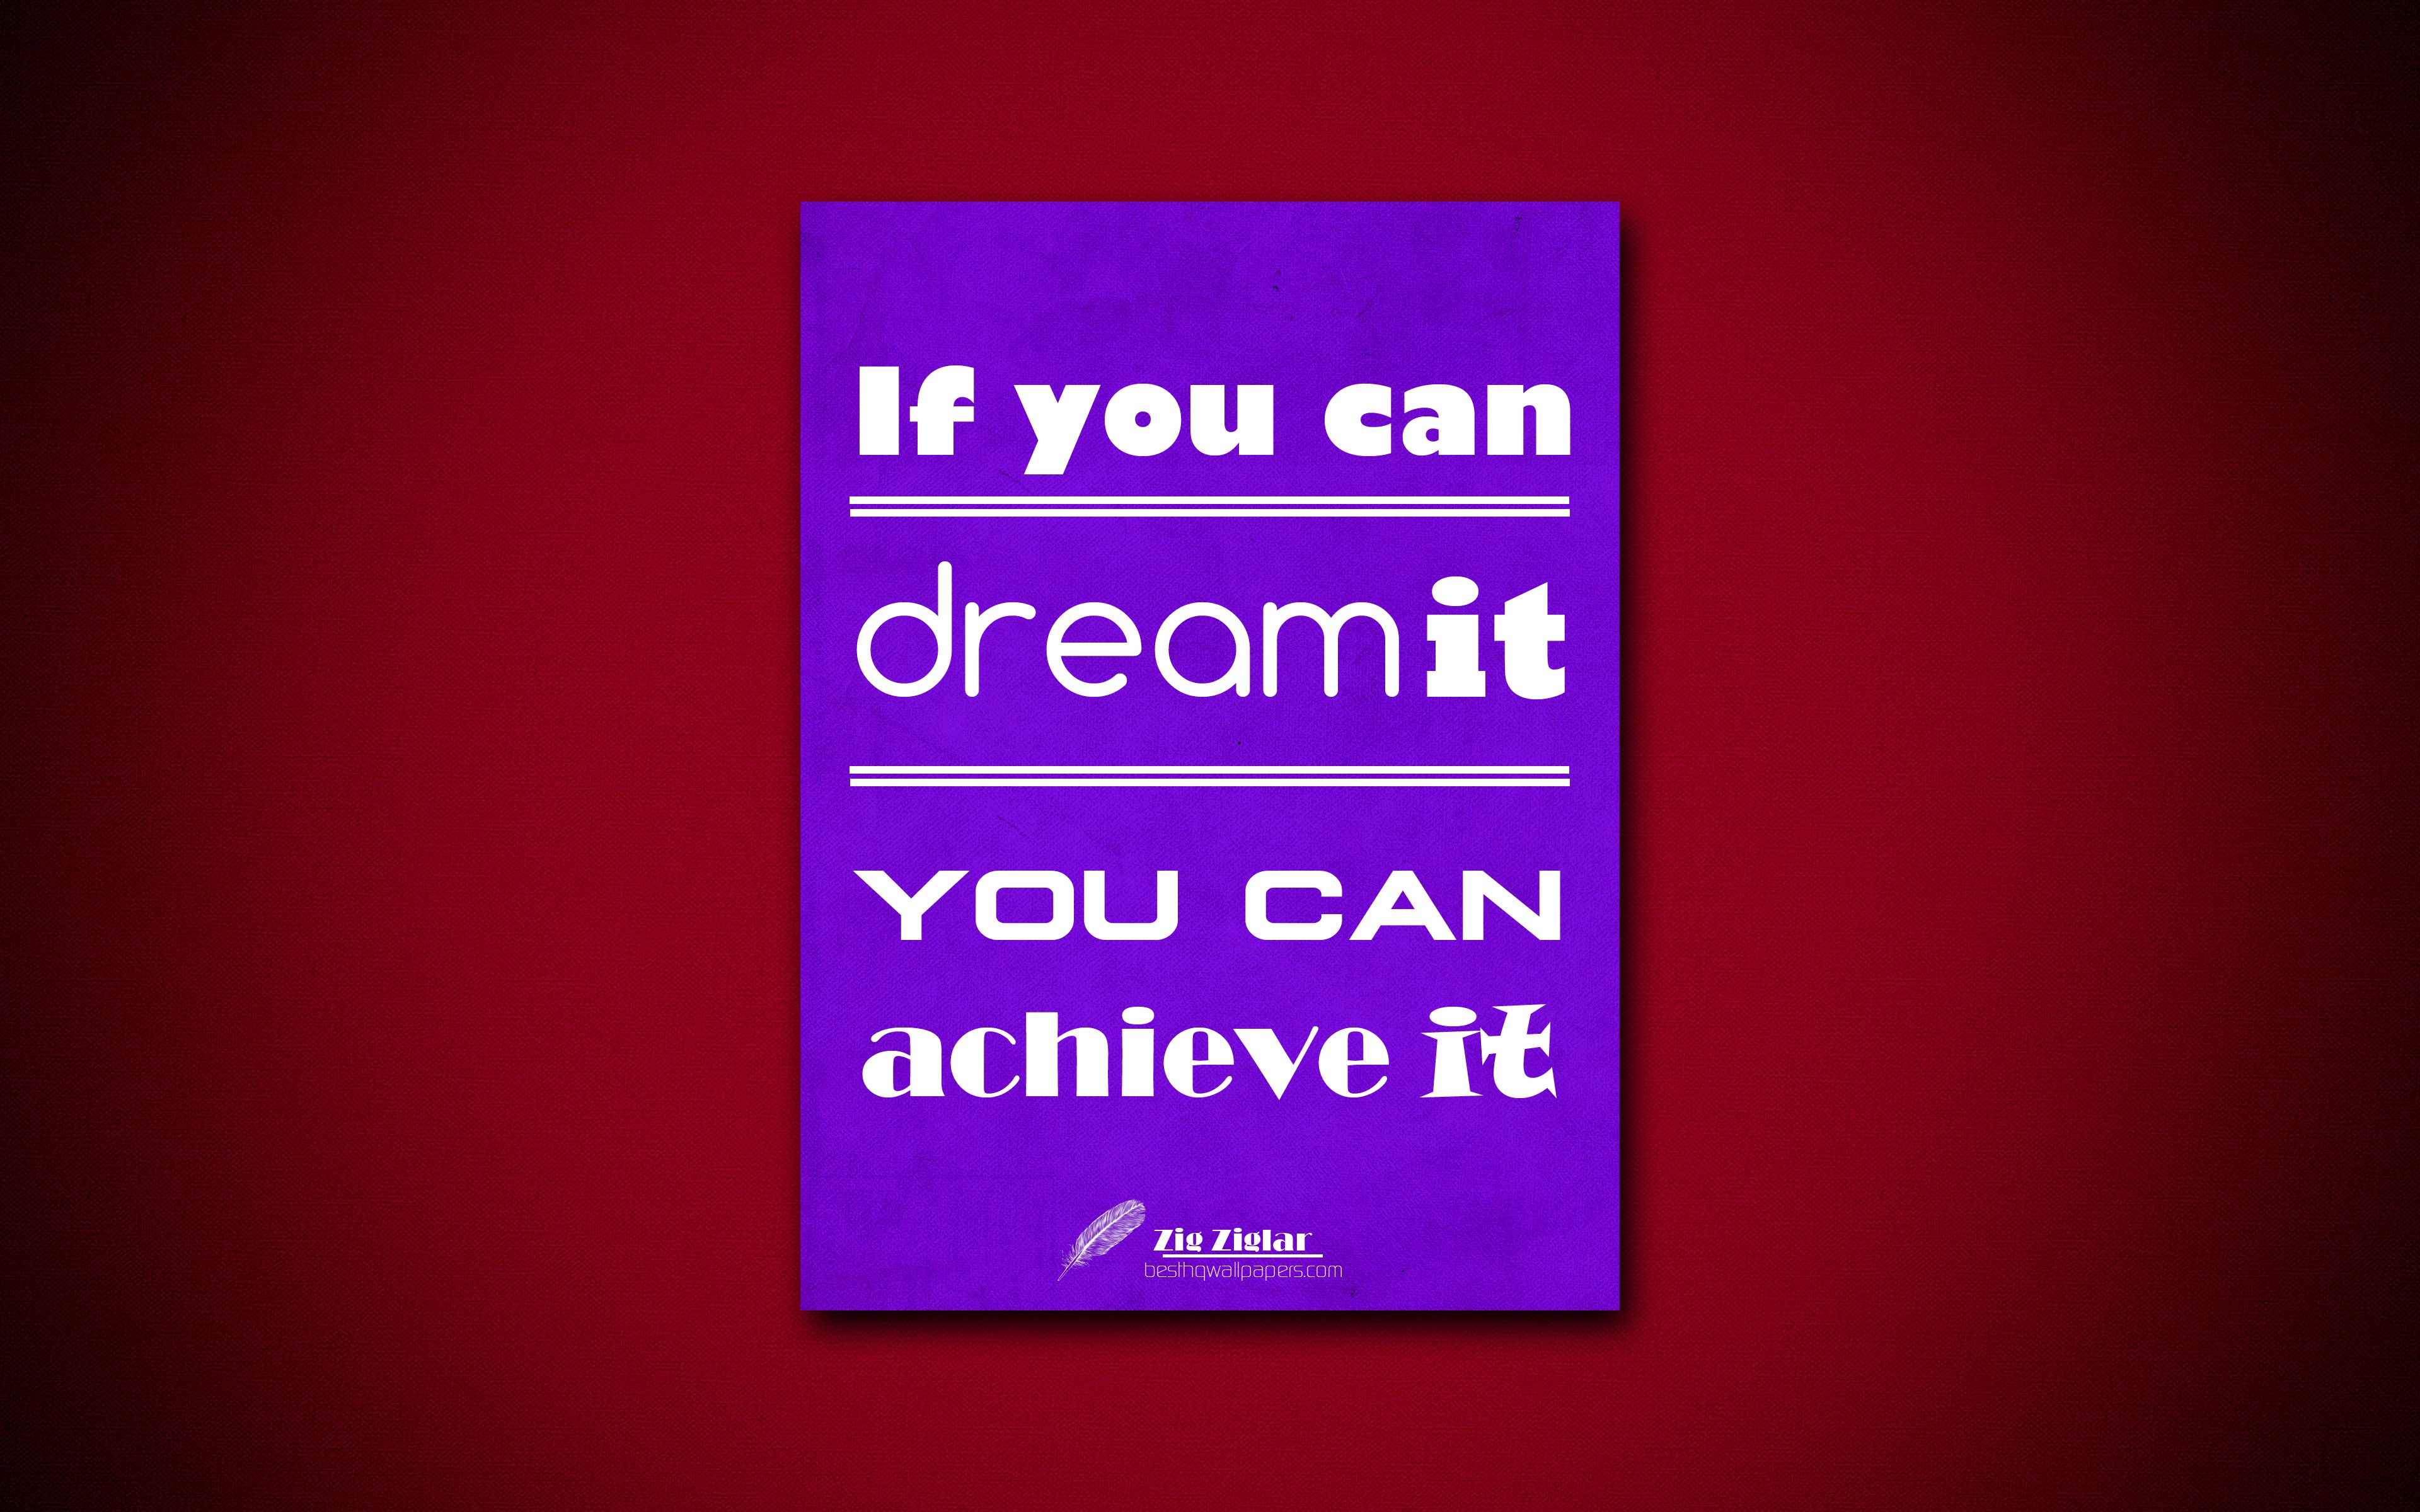 Download wallpaper If you can dream it you can achieve it, 4k, business quotes, Zig Ziglar, motivation, inspiration for desktop with resolution 3840x2400. High Quality HD picture wallpaper